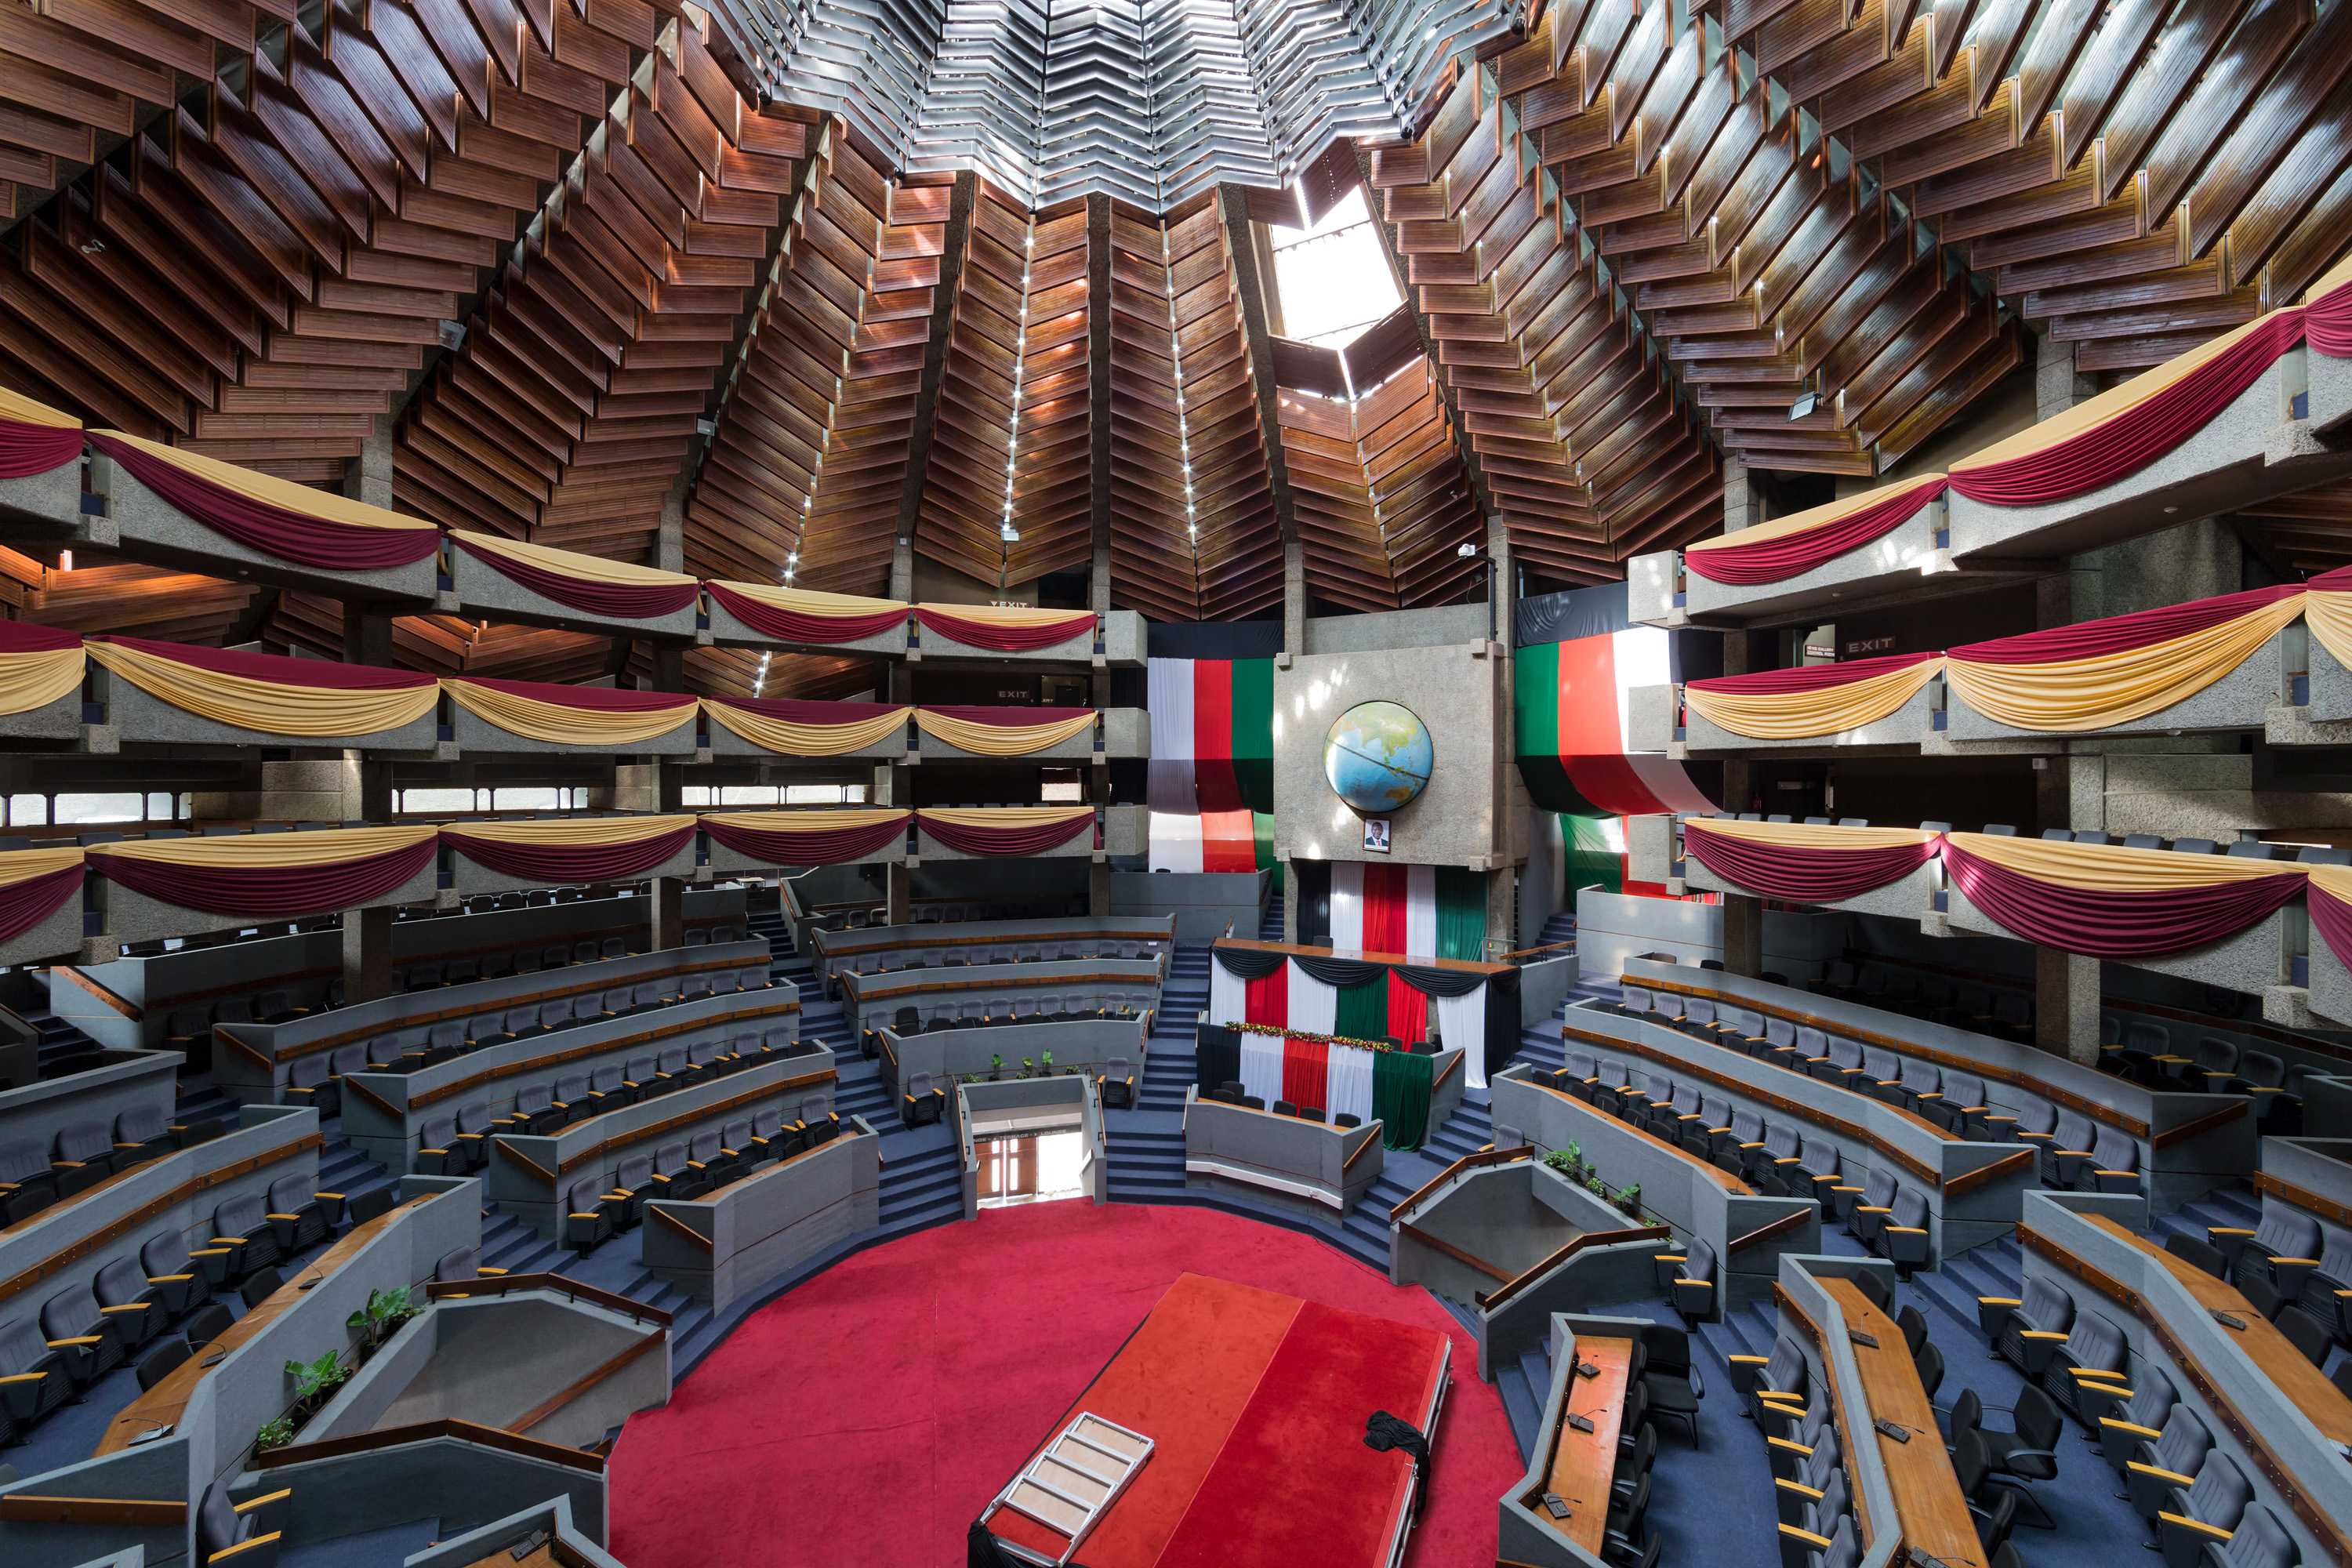 A modern, circular auditorium with a domed cieling in the Kenyatta International Conference Centre.